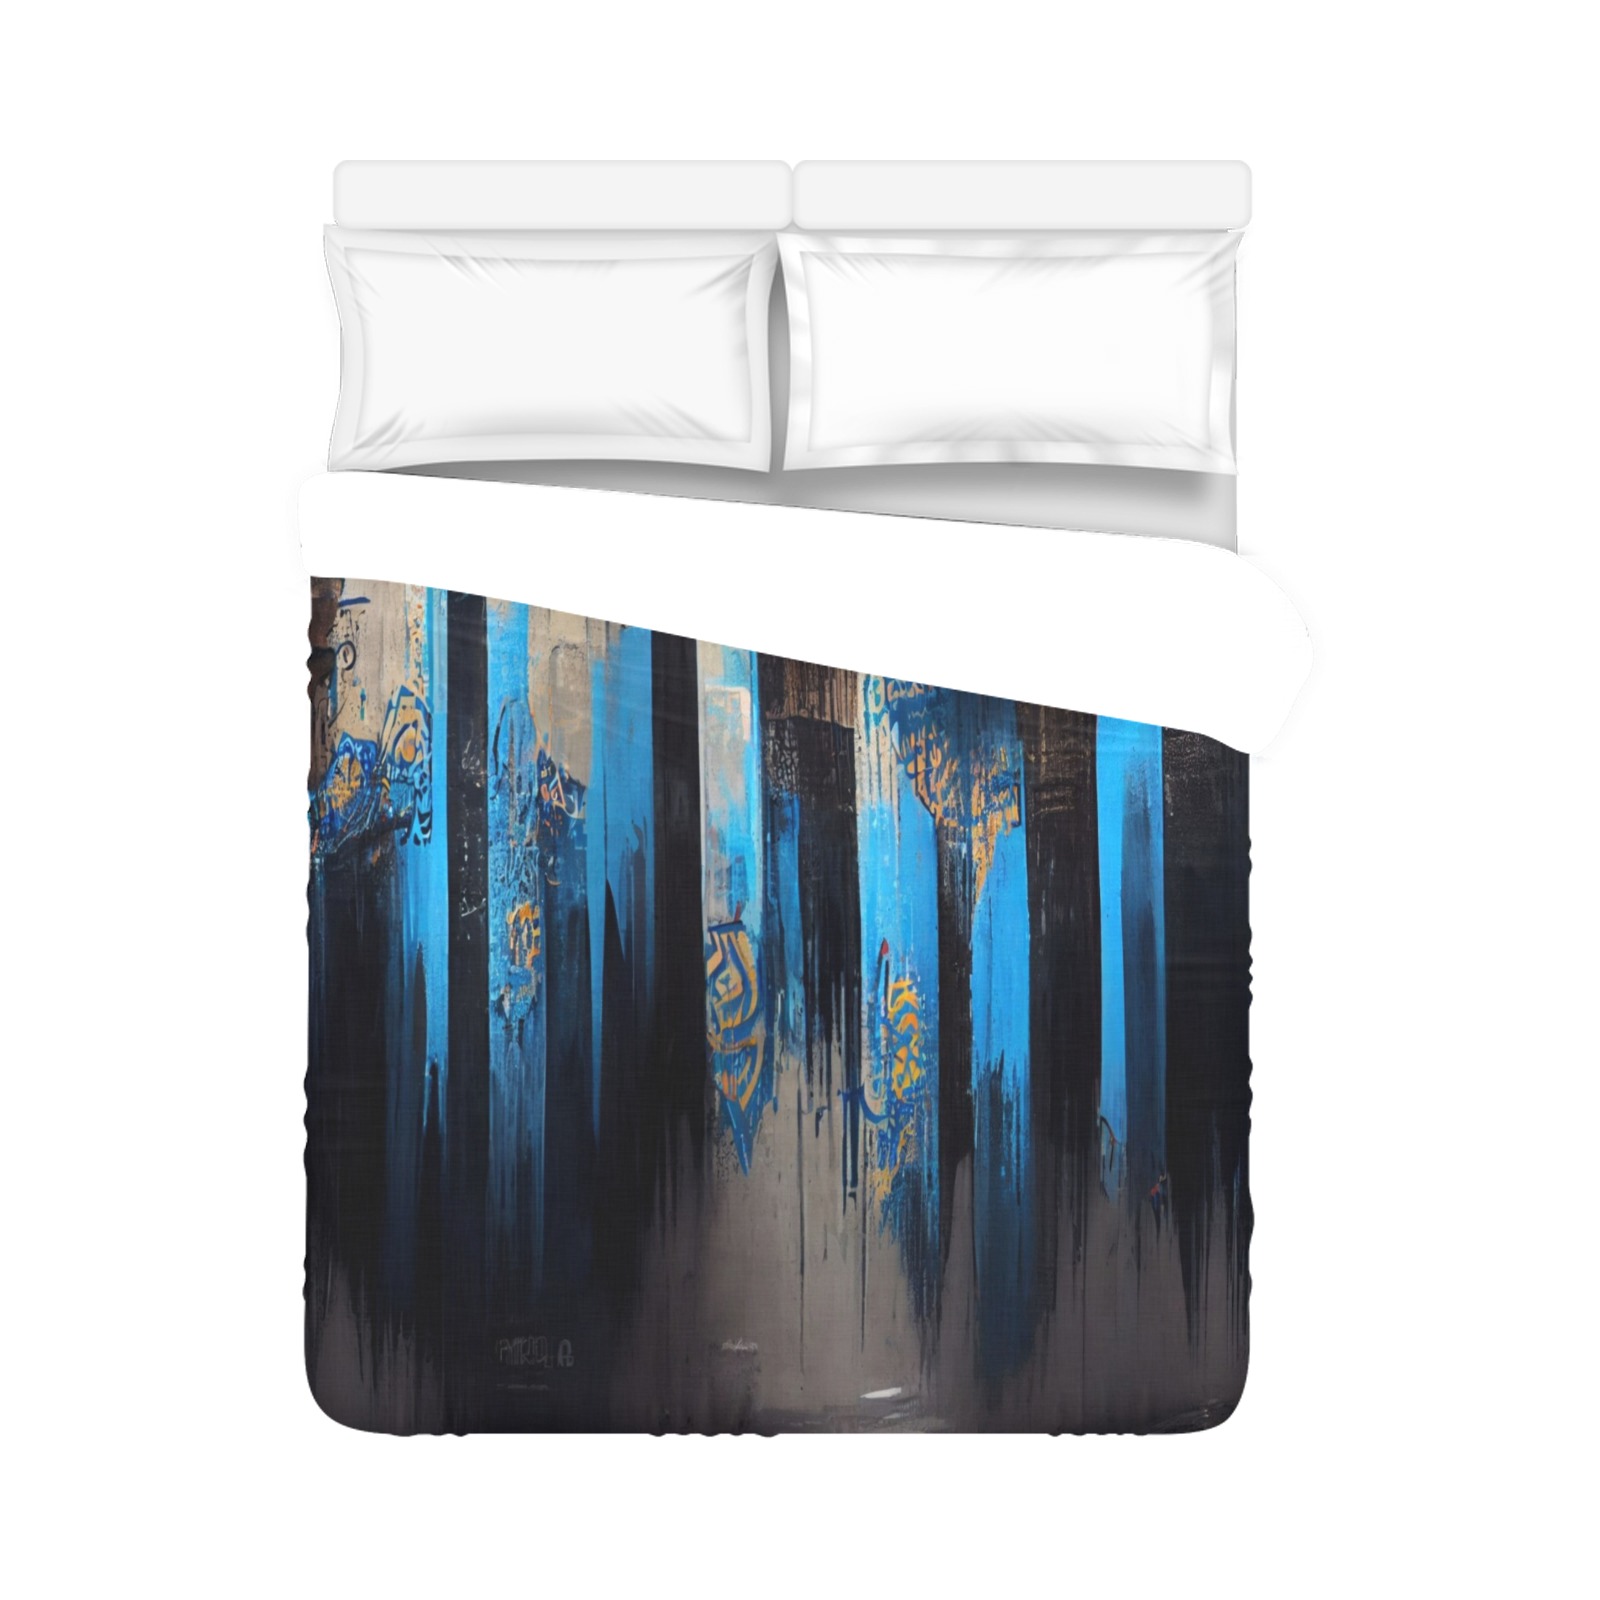 graffiti building's black and blue Duvet Cover 86"x70" ( All-over-print)